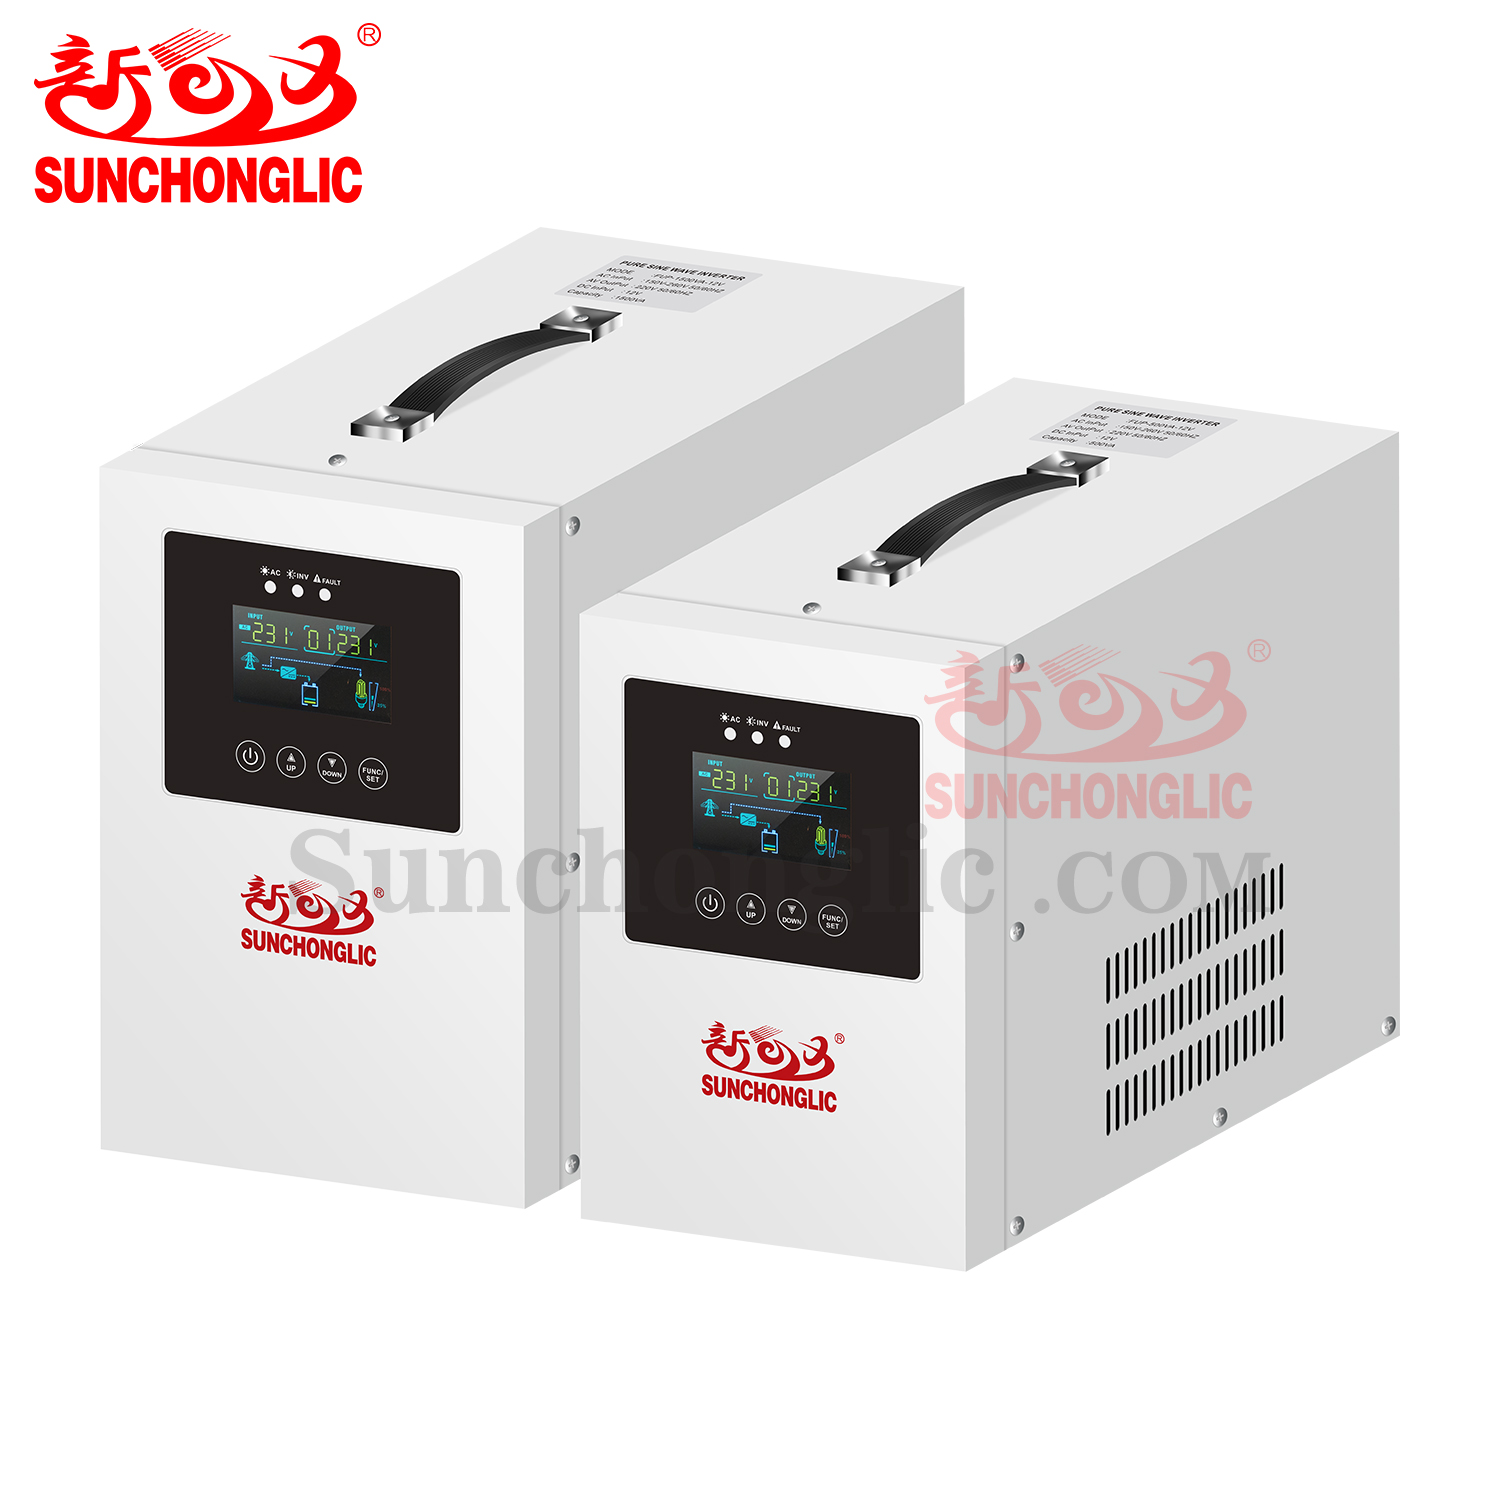 Sunchonglic 500w 800va pure sine wave invert UPS power inverter low frequency inverter charger